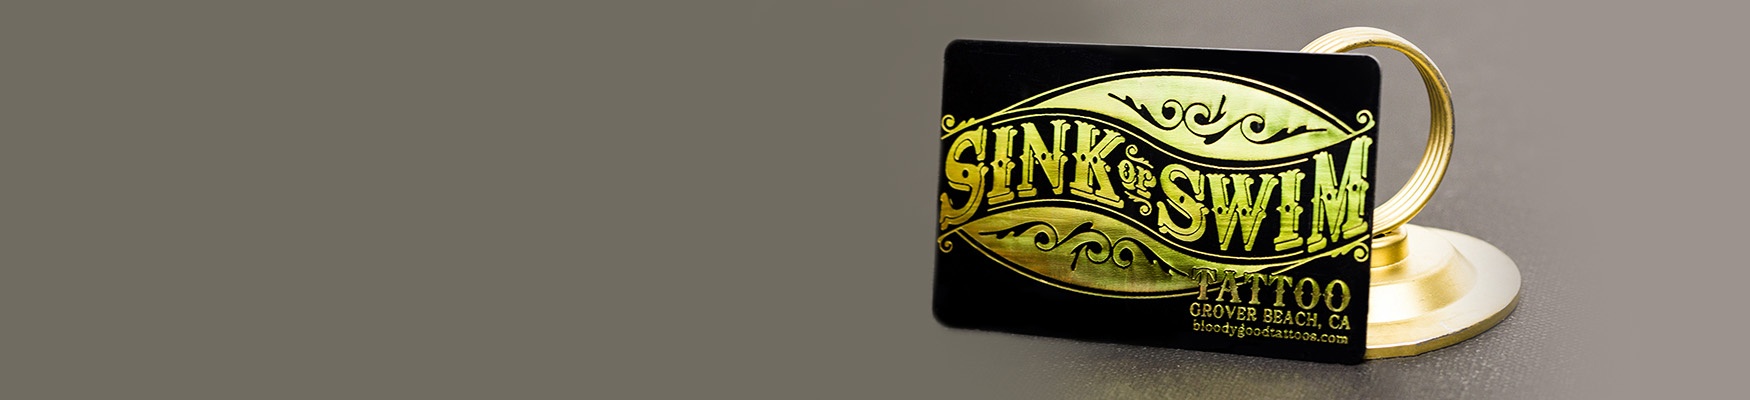 Example of Gold Foil Sink or Swim Tattoo Business Card